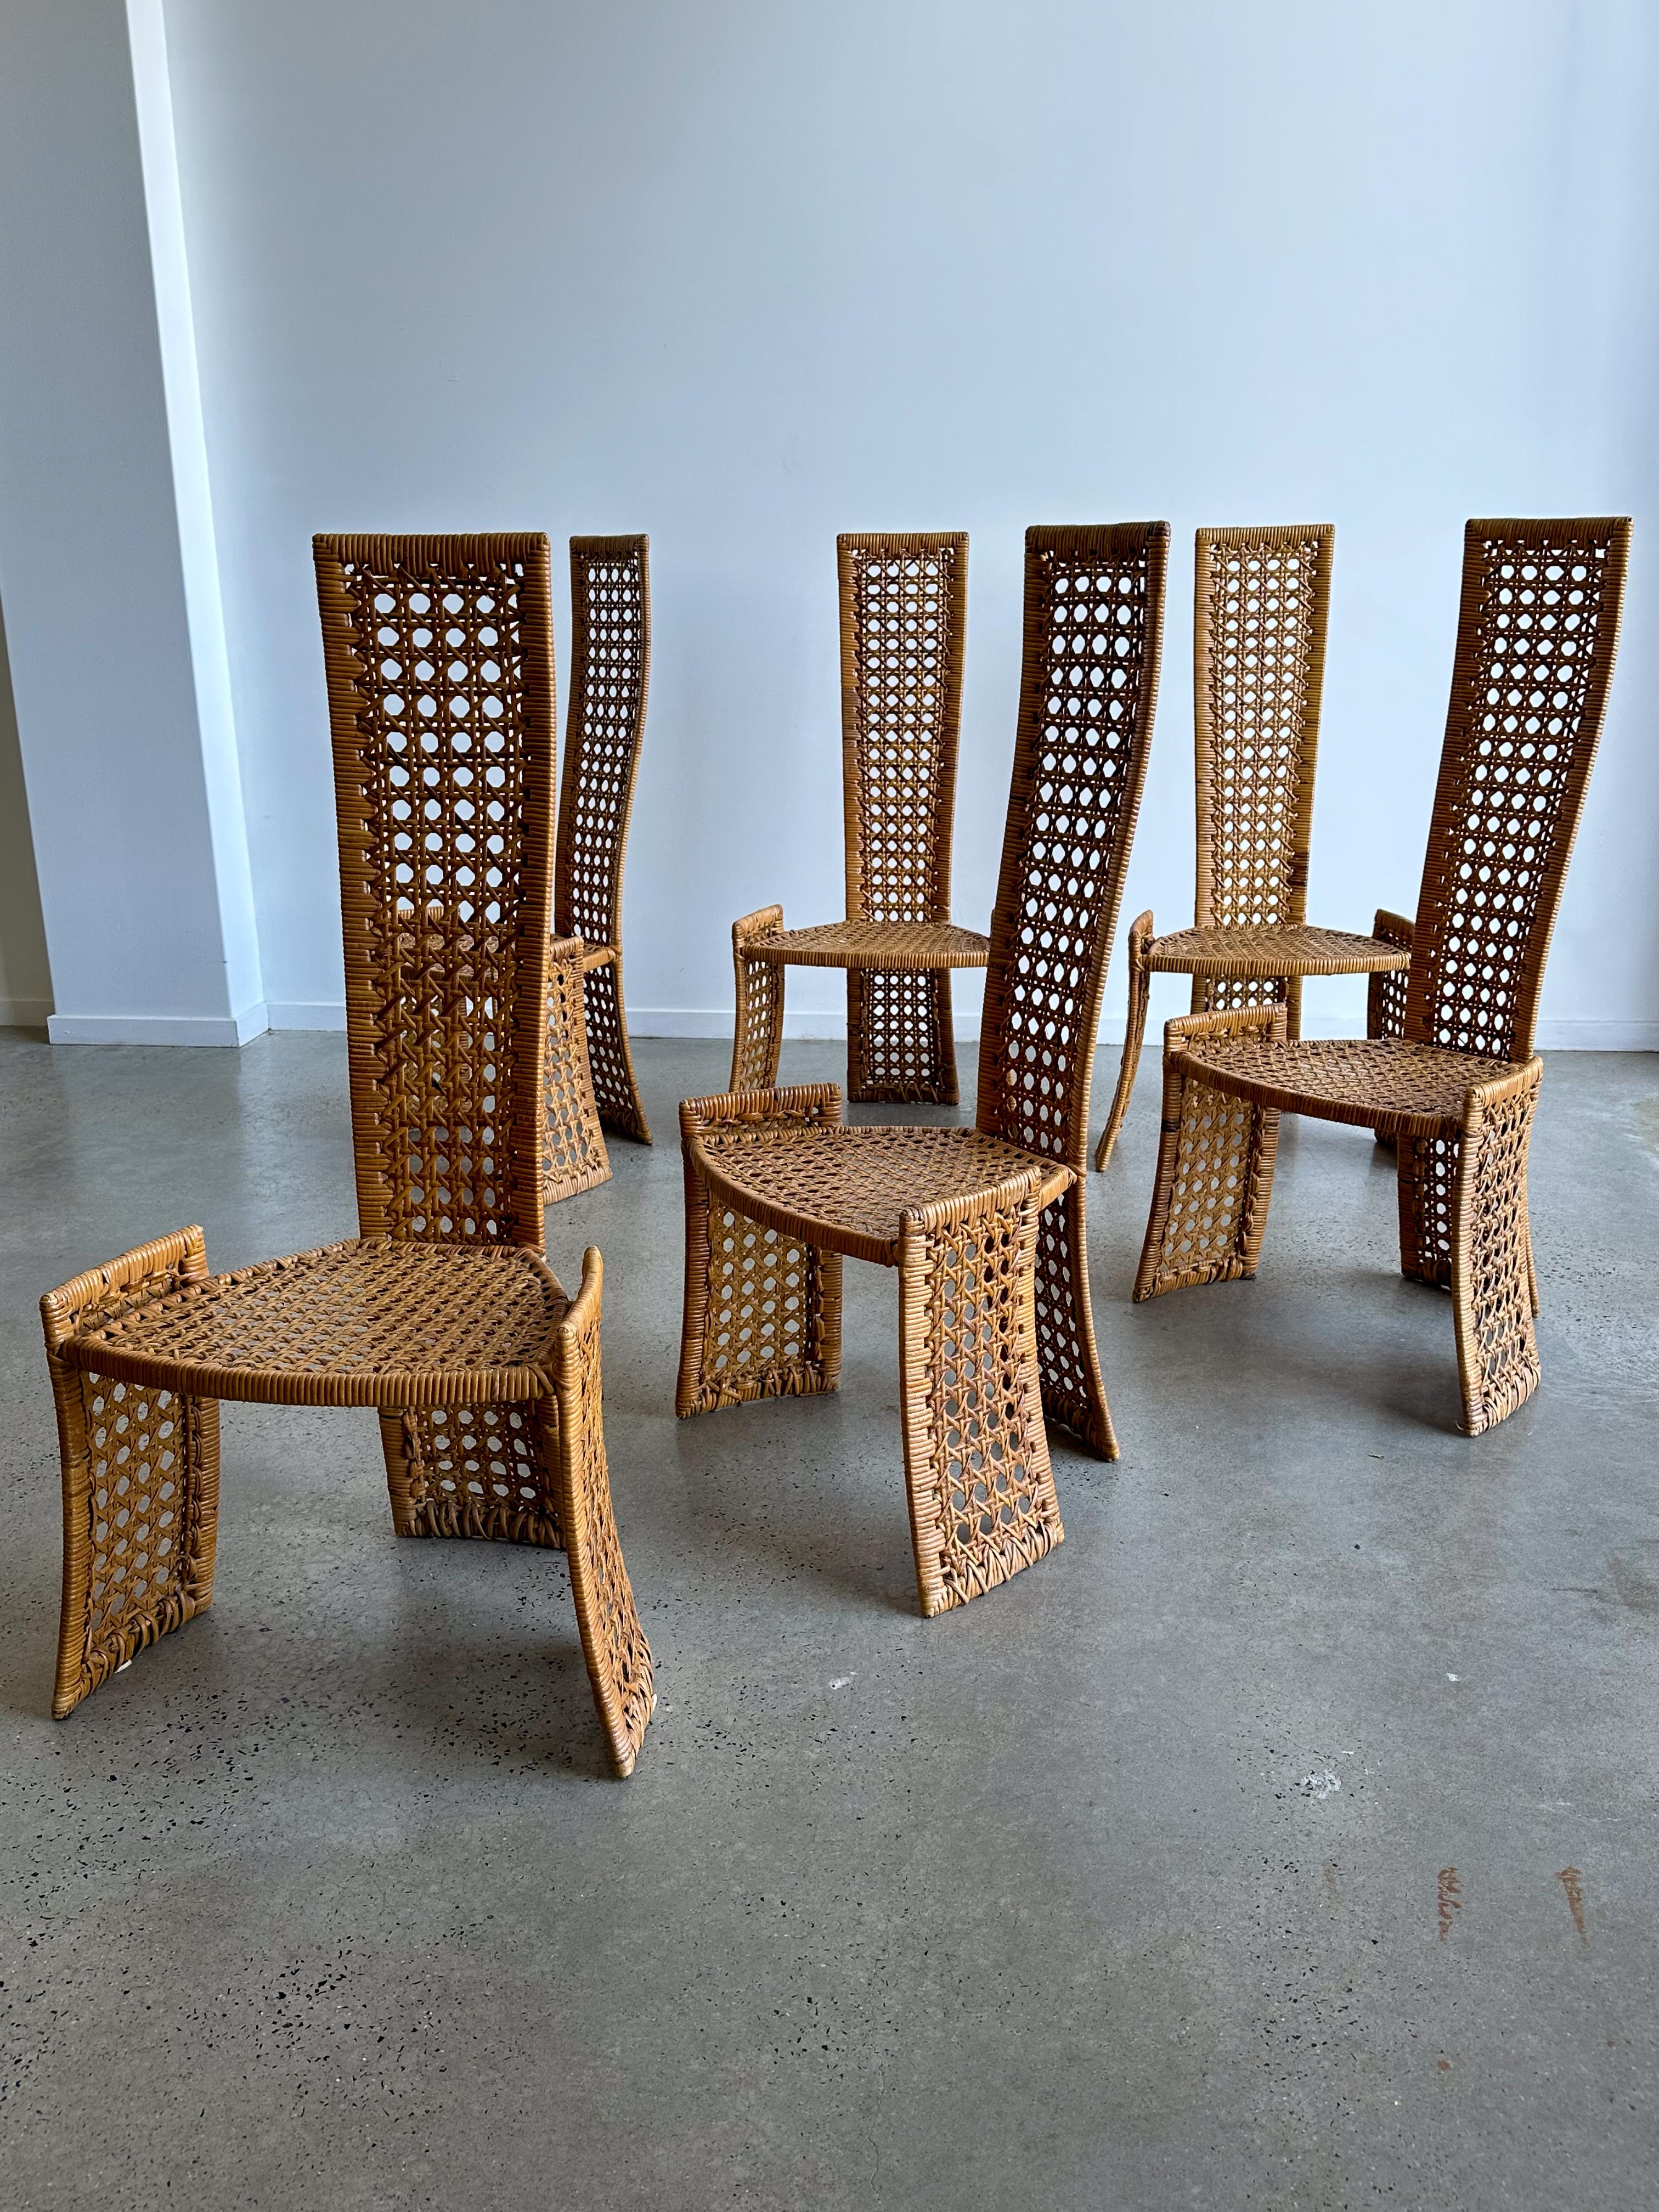 A fabulous unique set of six rattan dining chairs from a difficult to find series by the wildly creative Danny Ho Fong for Tropi-cal, circa 1975. Beautiful rattan over steel frame construction. The high-back design gives a clear wink to the